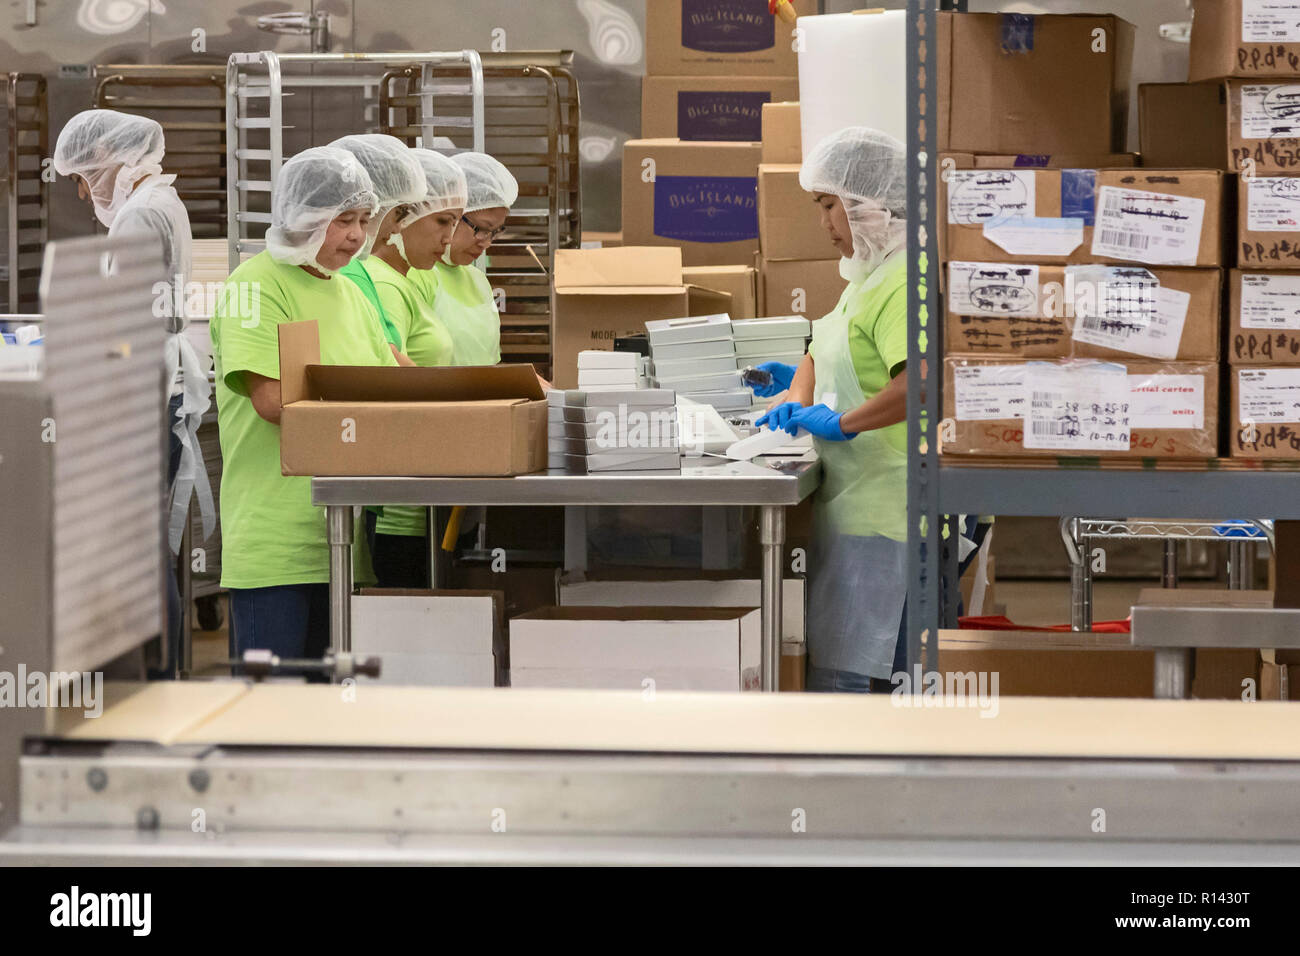 Hilo, Hawaii - Workers packaging candy at Big Island Candies. Stock Photo